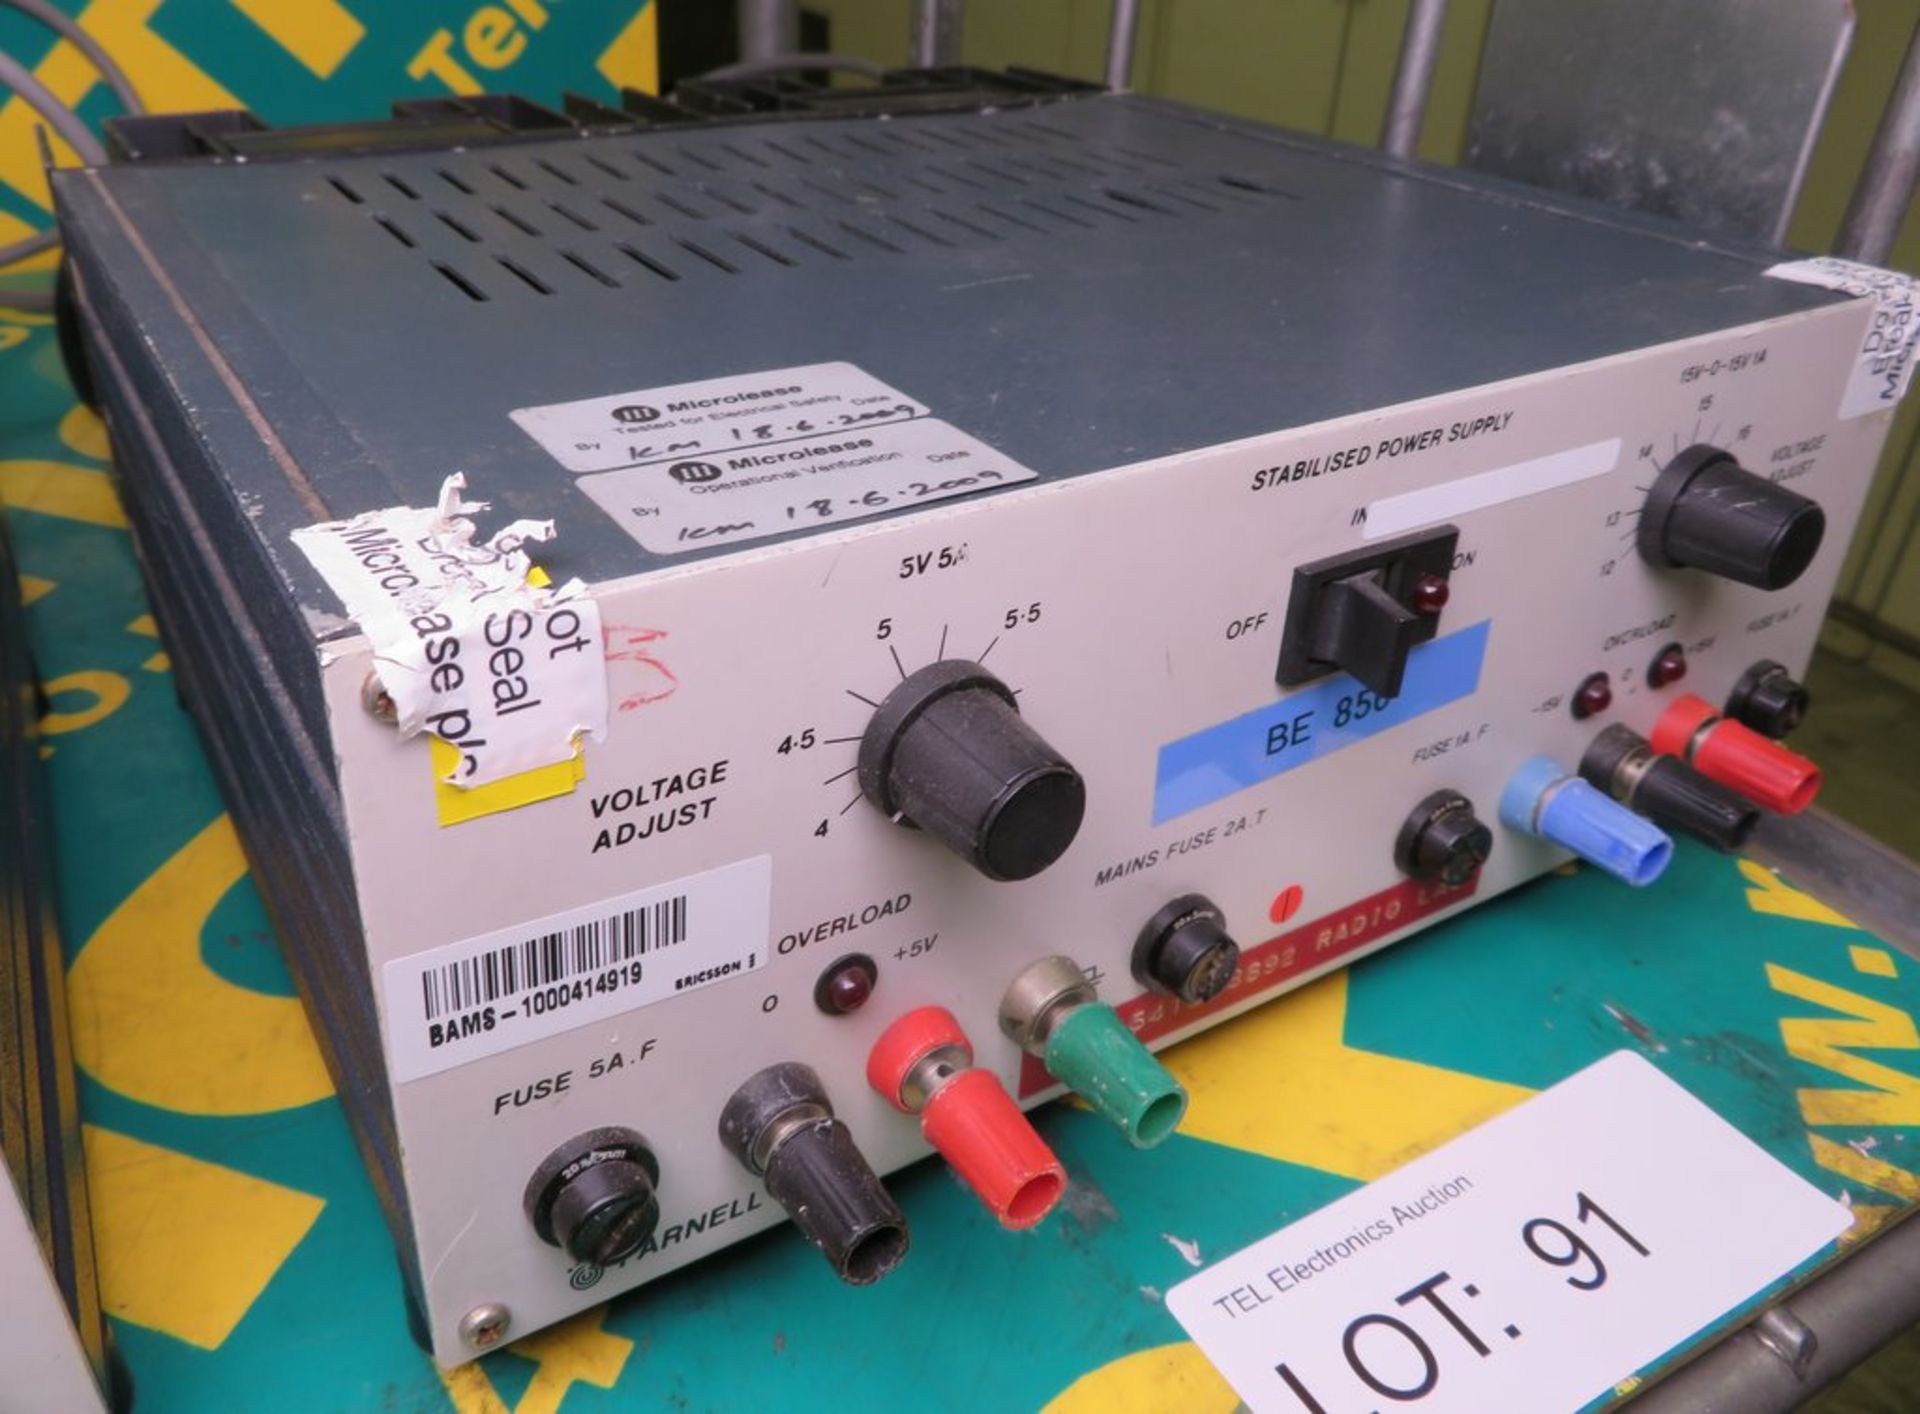 Farnell TOPS2 Stabilised Power Supply - Image 2 of 3